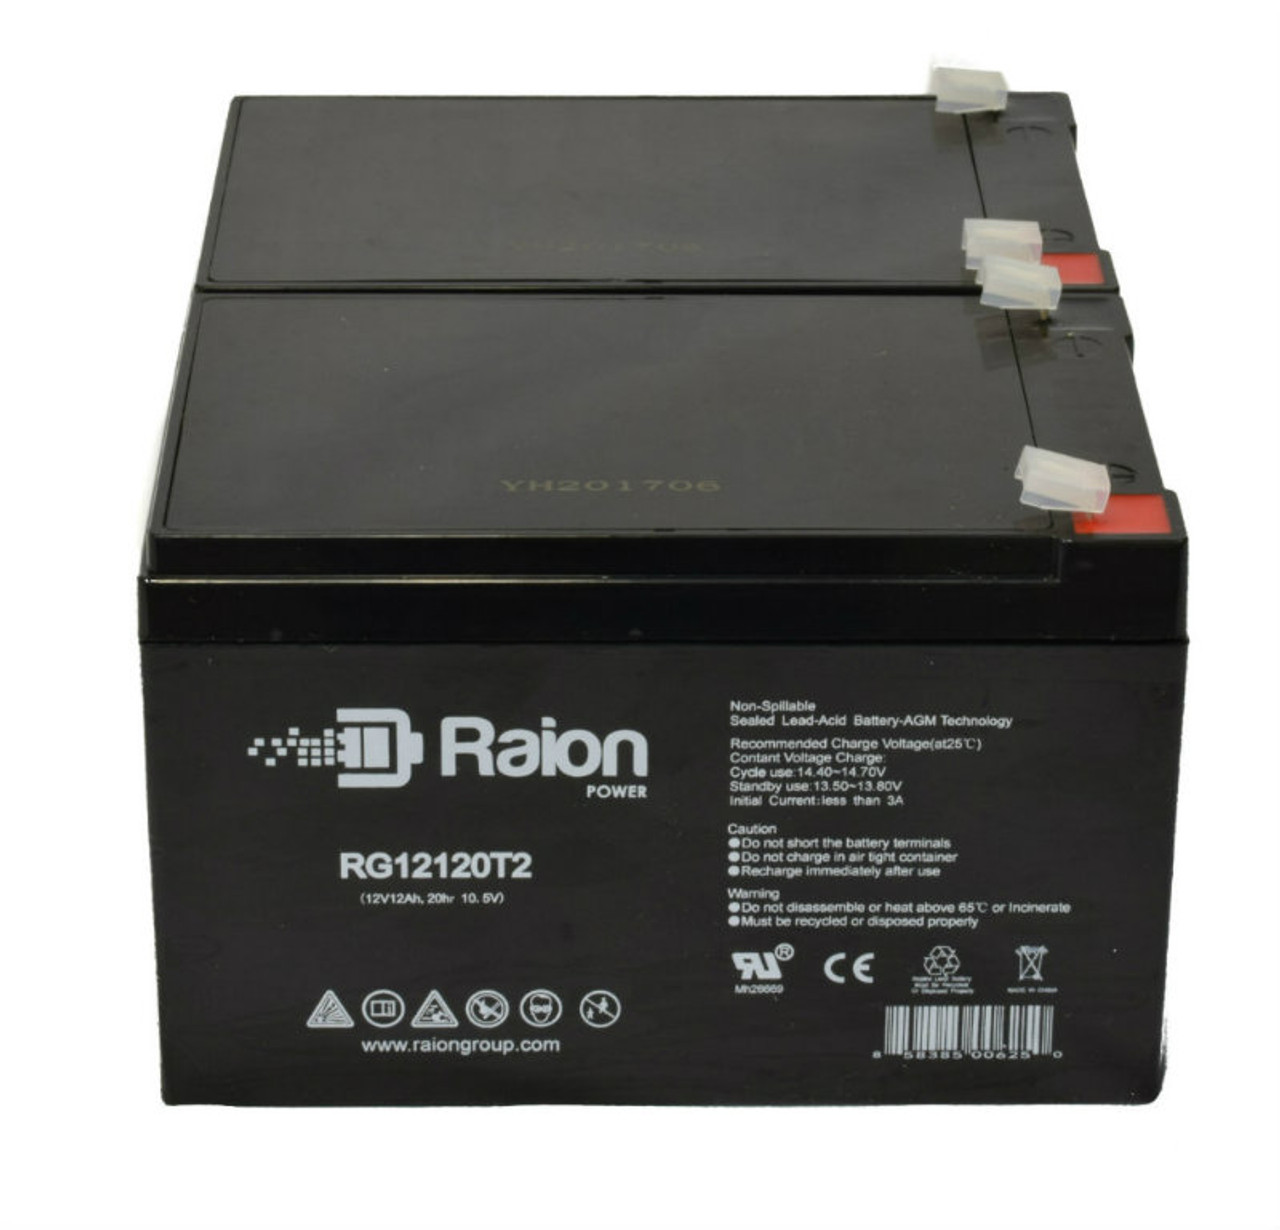 Raion Power 12V 12Ah Non-Spillable Compatible Replacement Battery for MHB MS12-12 - (2 Pack)